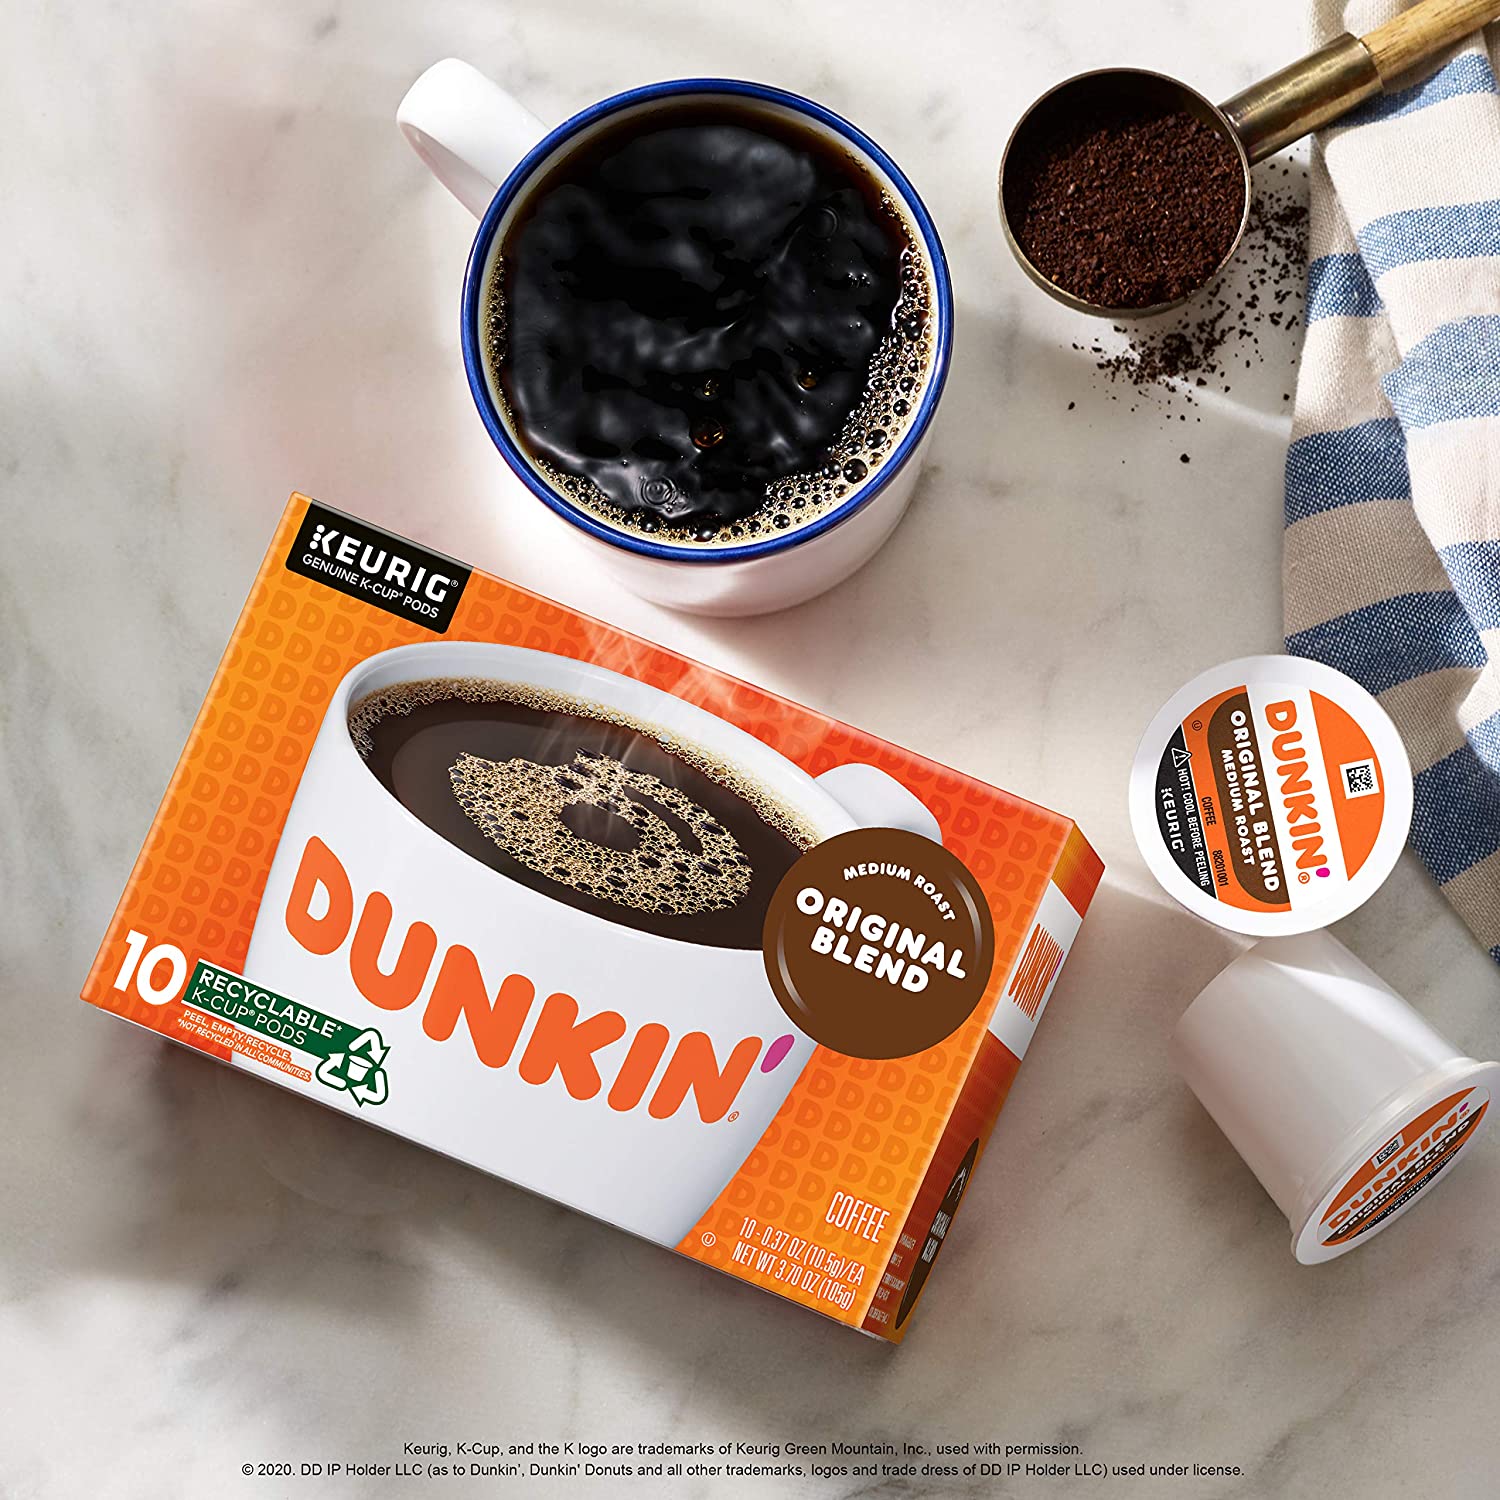 Dunkin' Cold Coffee, 60 Keurig K-Cup Pods 